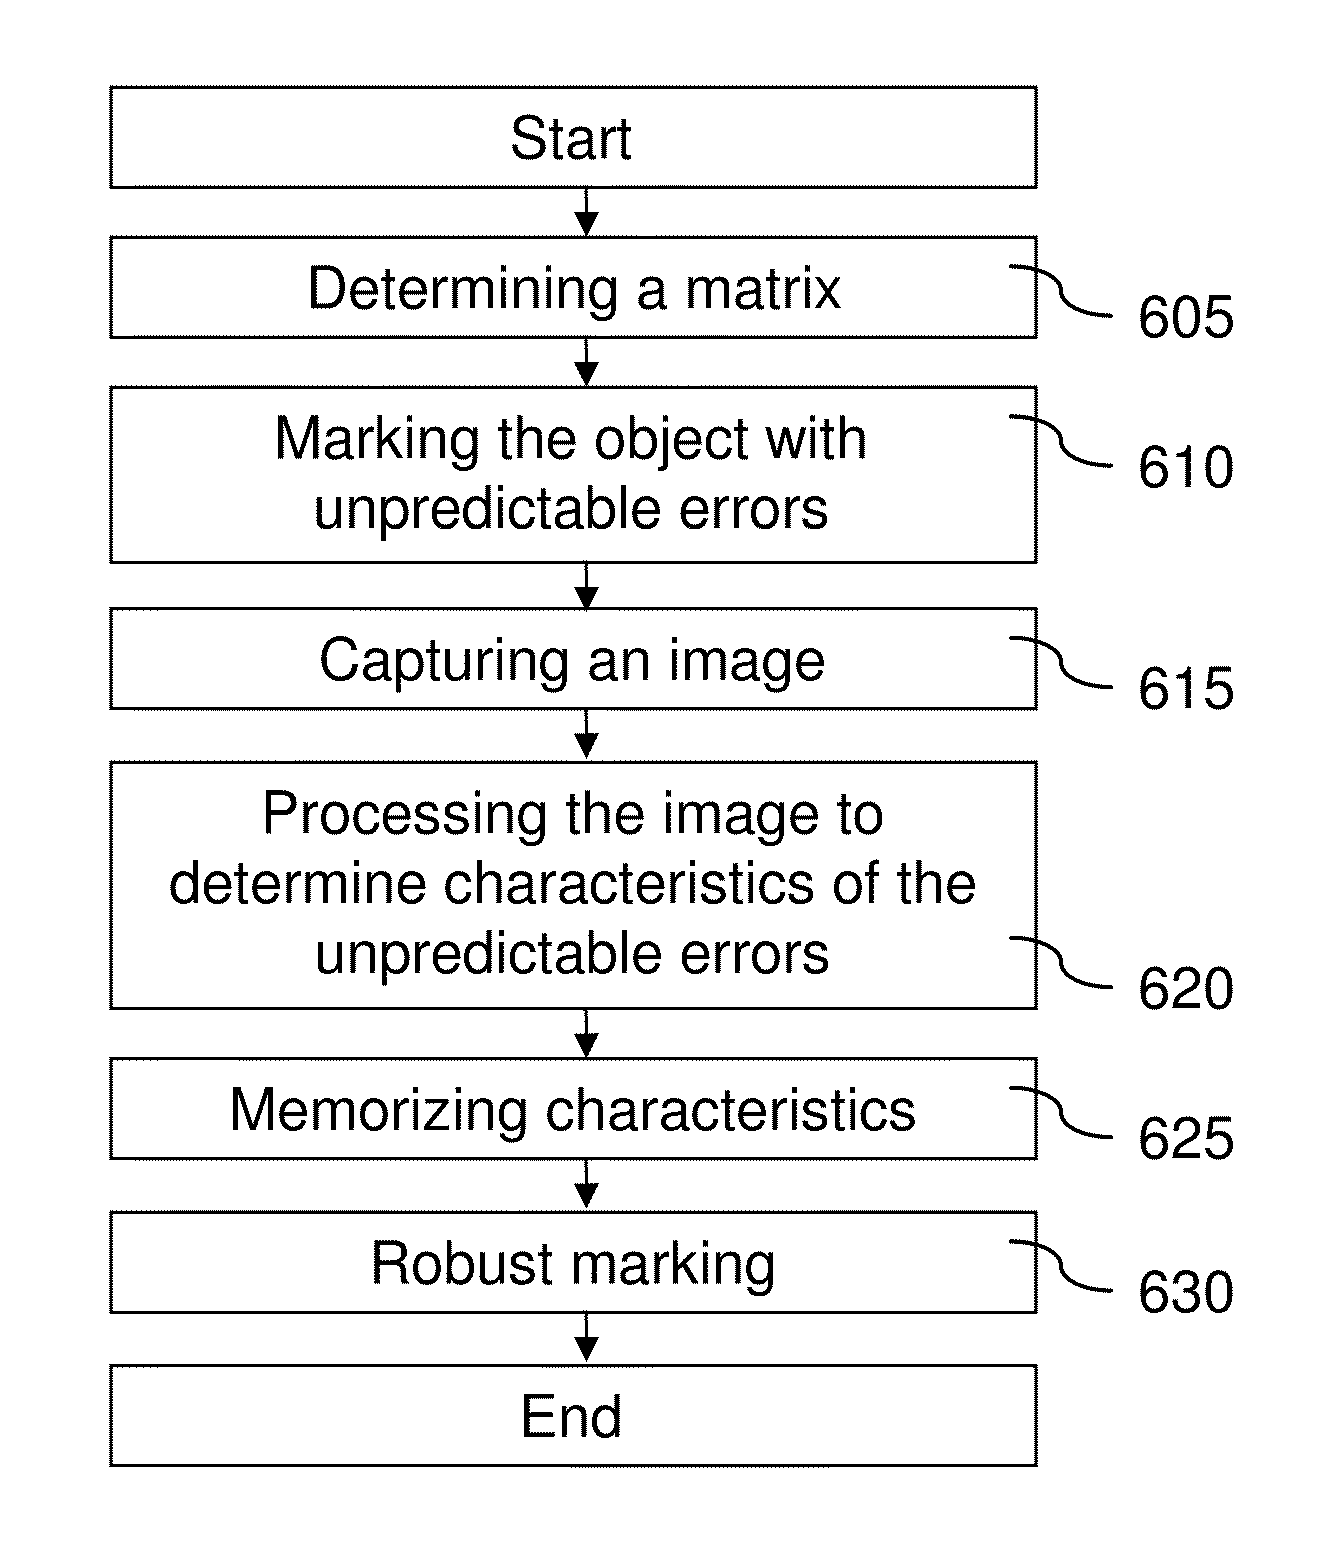 Document securization method and device printing a distribution of dots on said document